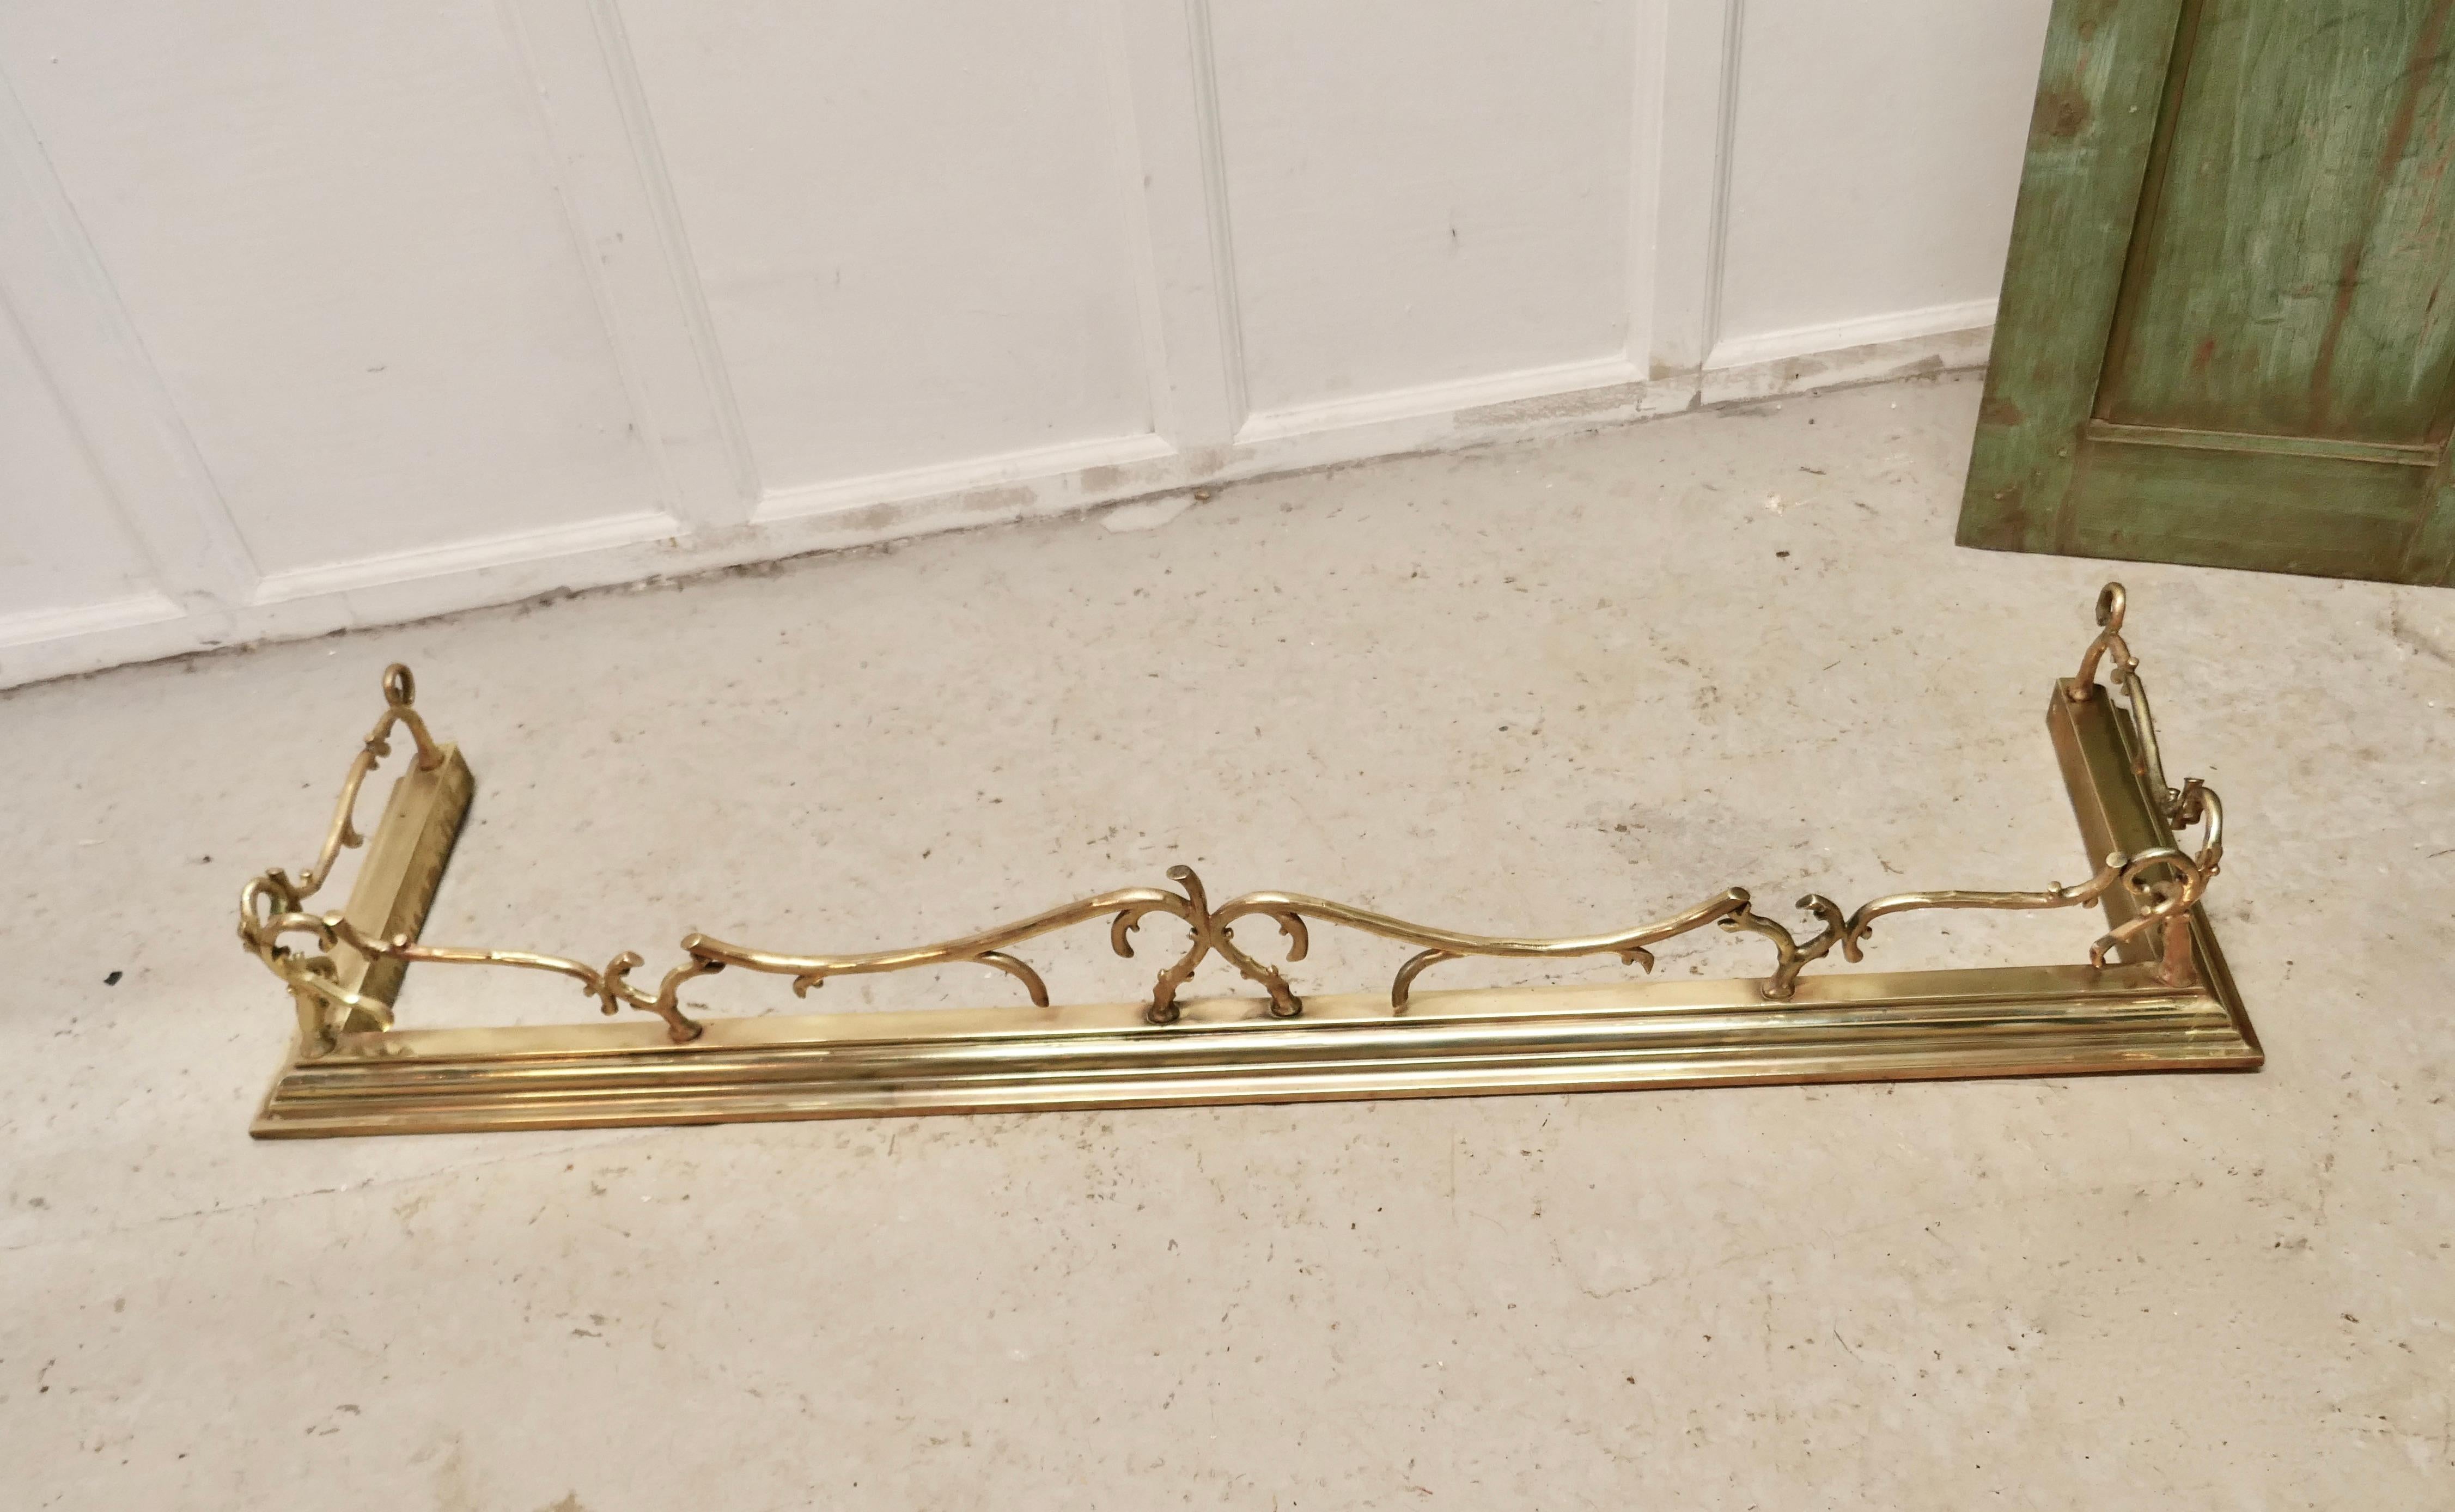 Very pretty Victorian Art Nouveau brass fender

This is a beautifully designed Victorian brass fender it has superb Art Nouveau twisted twig decoration worked in brass
The fender is in very good condition it is 7” high, and 53” long and 15”